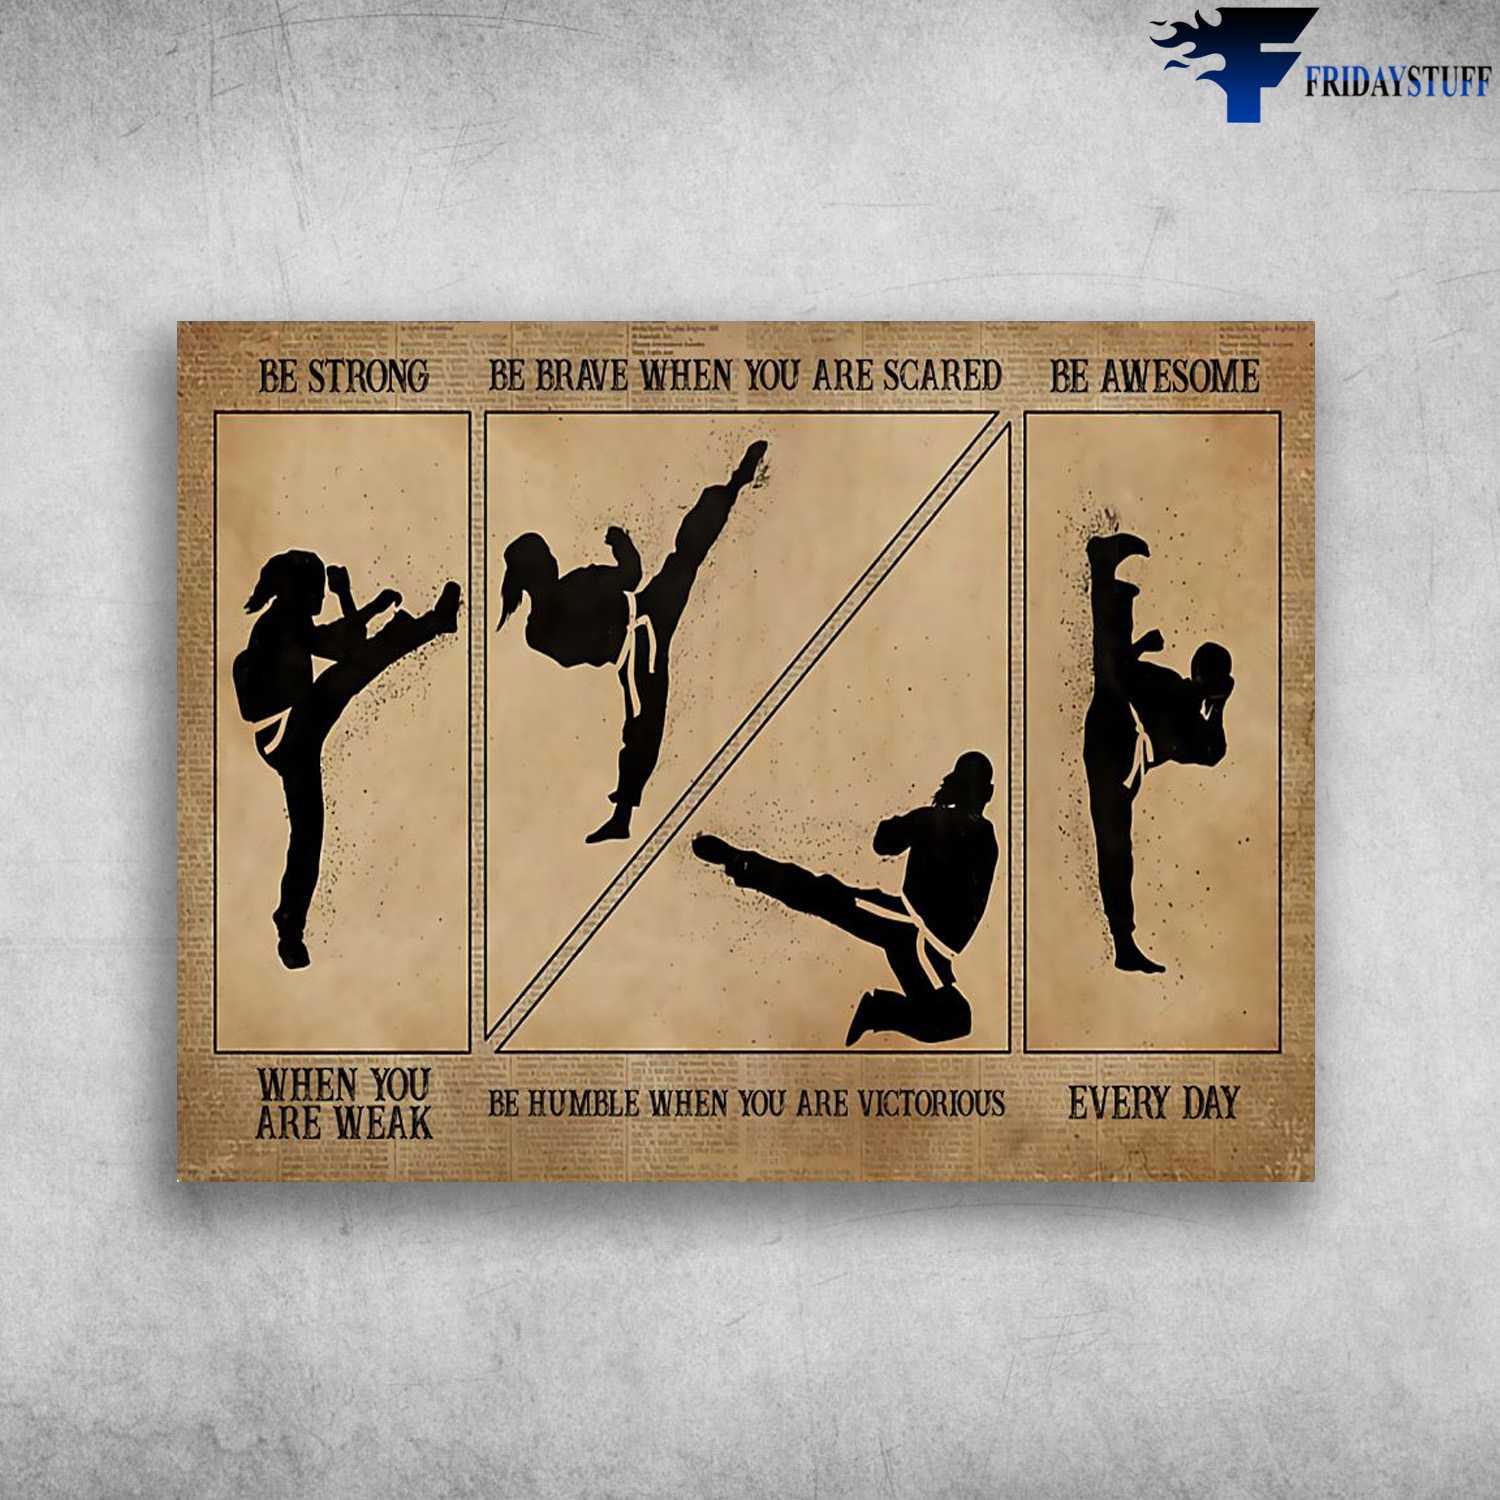 Teakwondo Poster, Teakwondo Lover, Be Strong When You Are Weak, Be Bravel When You Are Scared, Be Humble When You Are Victorious, Be Badass Everyday